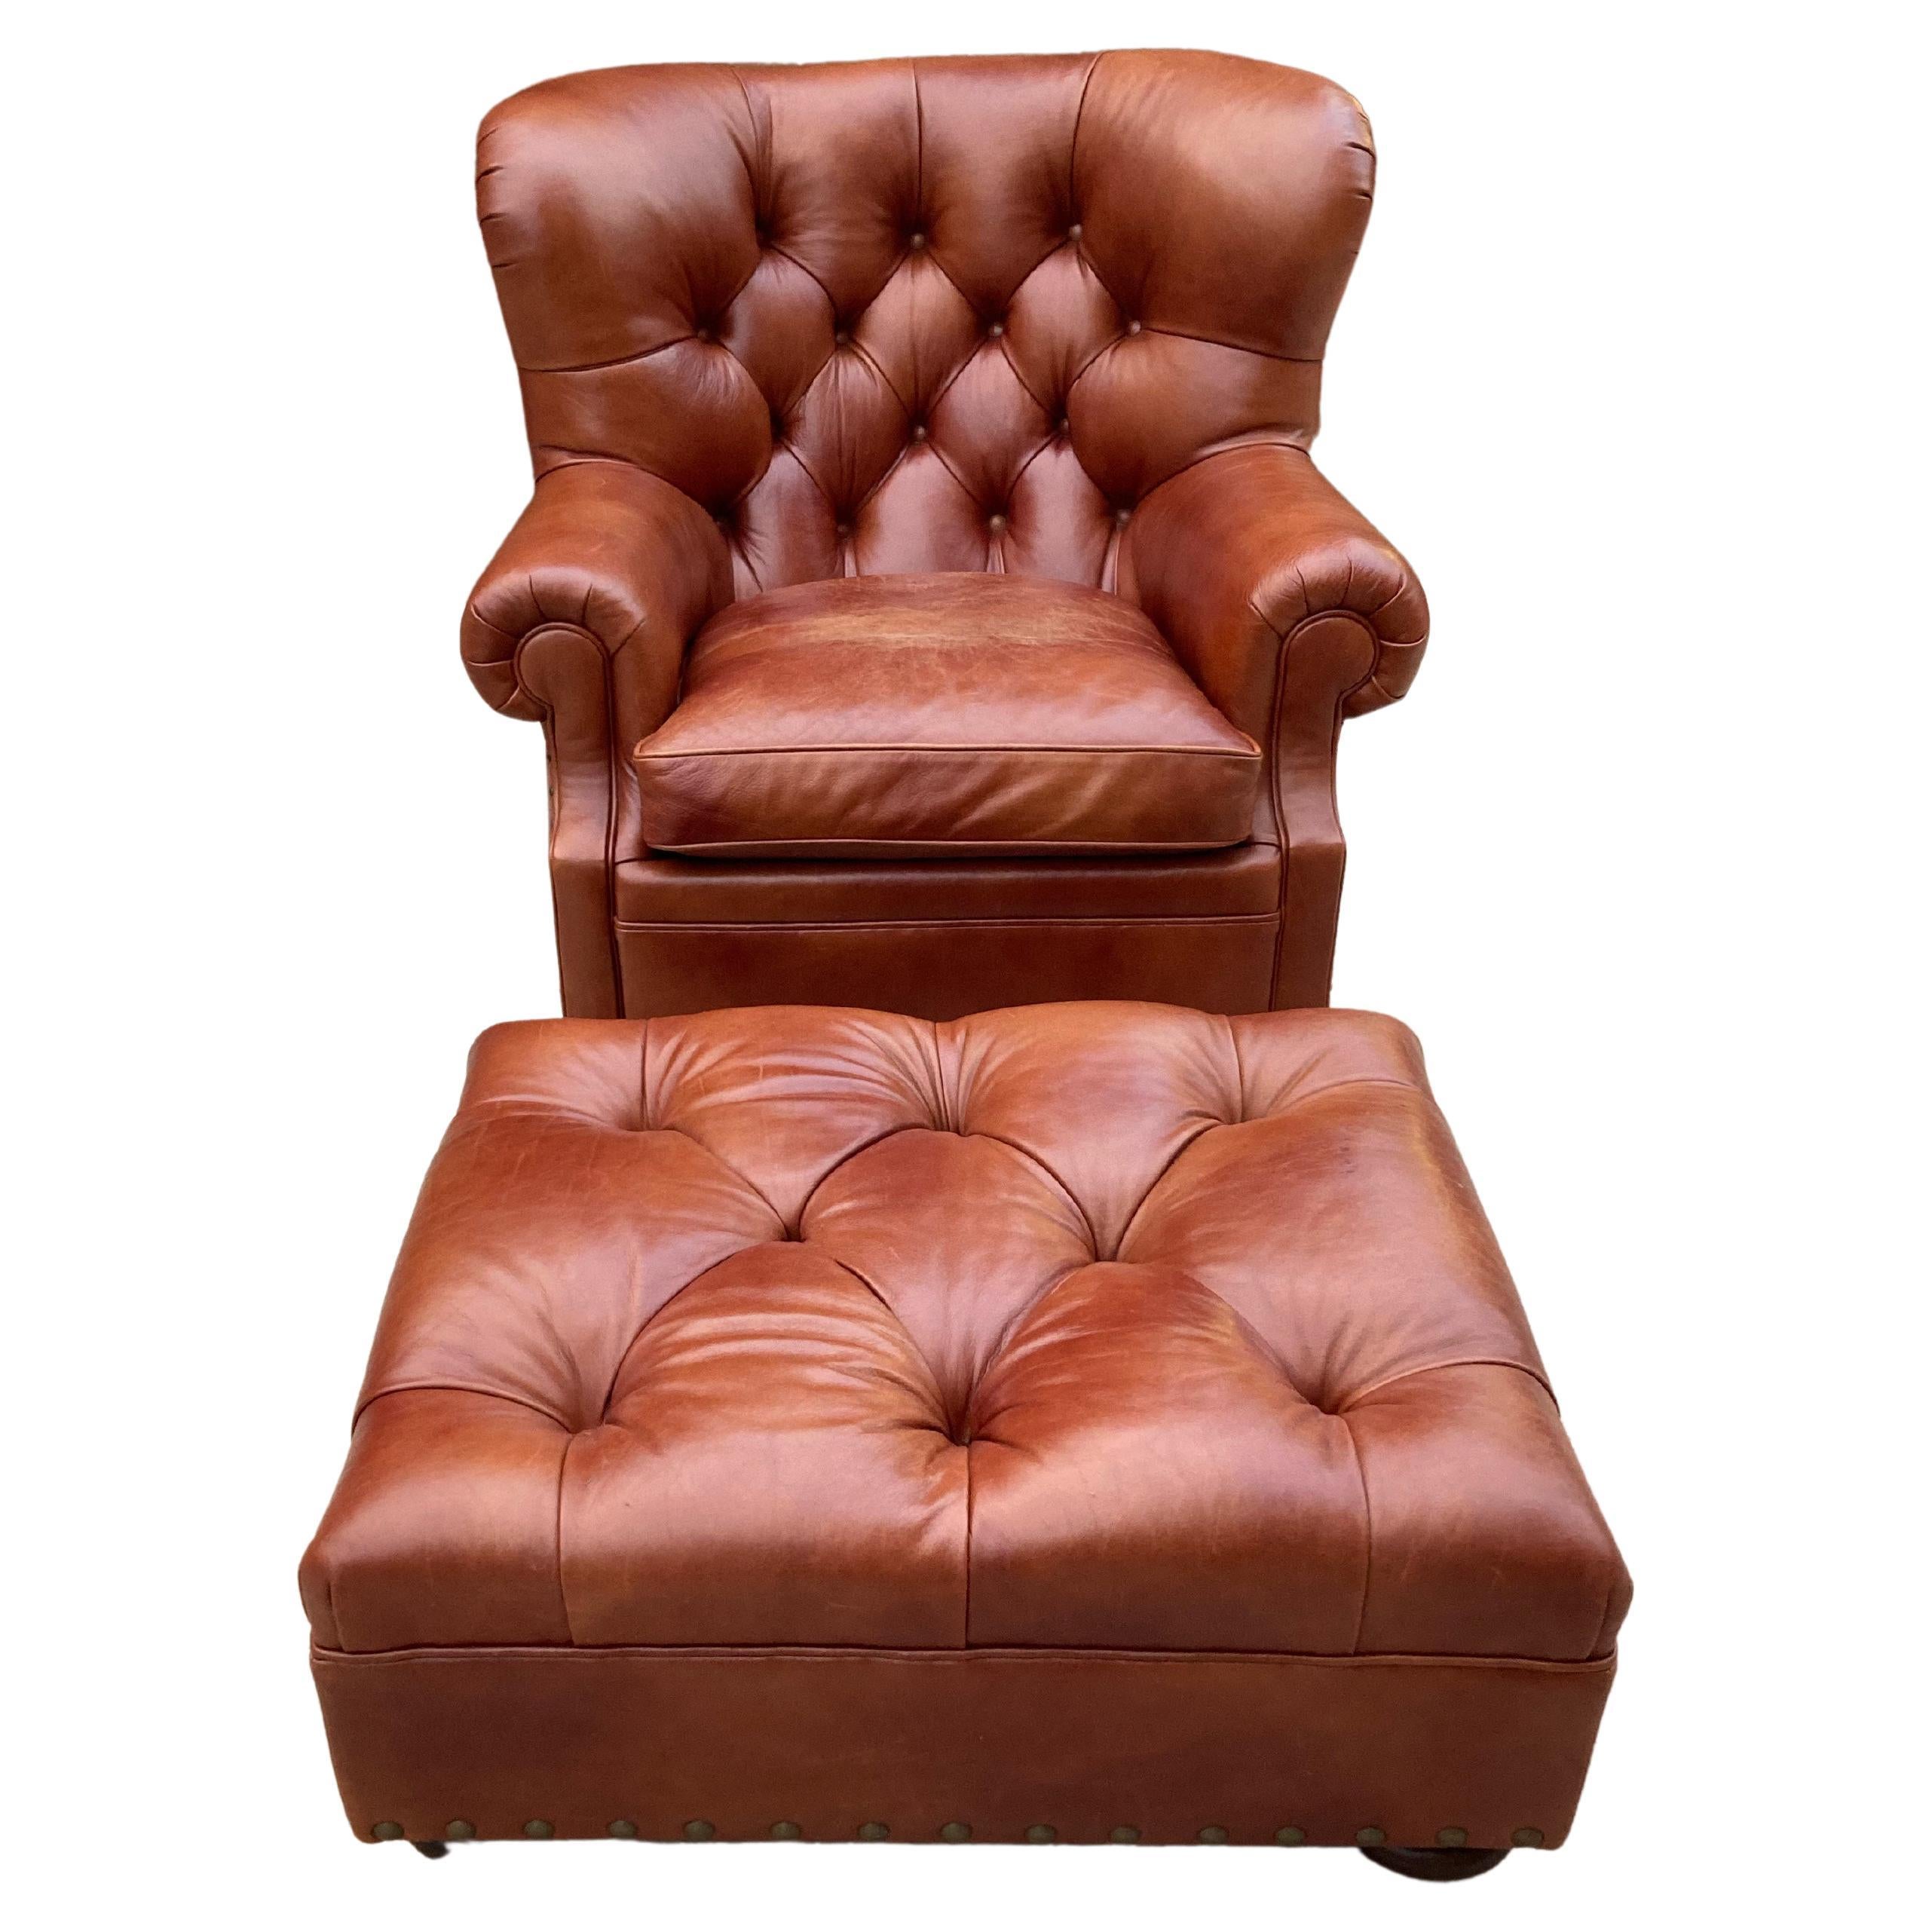 Super Luxe Ralph Lauren Tufted Leather Writer's Club Chair and Ottoman For  Sale at 1stDibs | ralph lauren leather chair, ralph lauren writers chair, ralph  lauren writer's chair